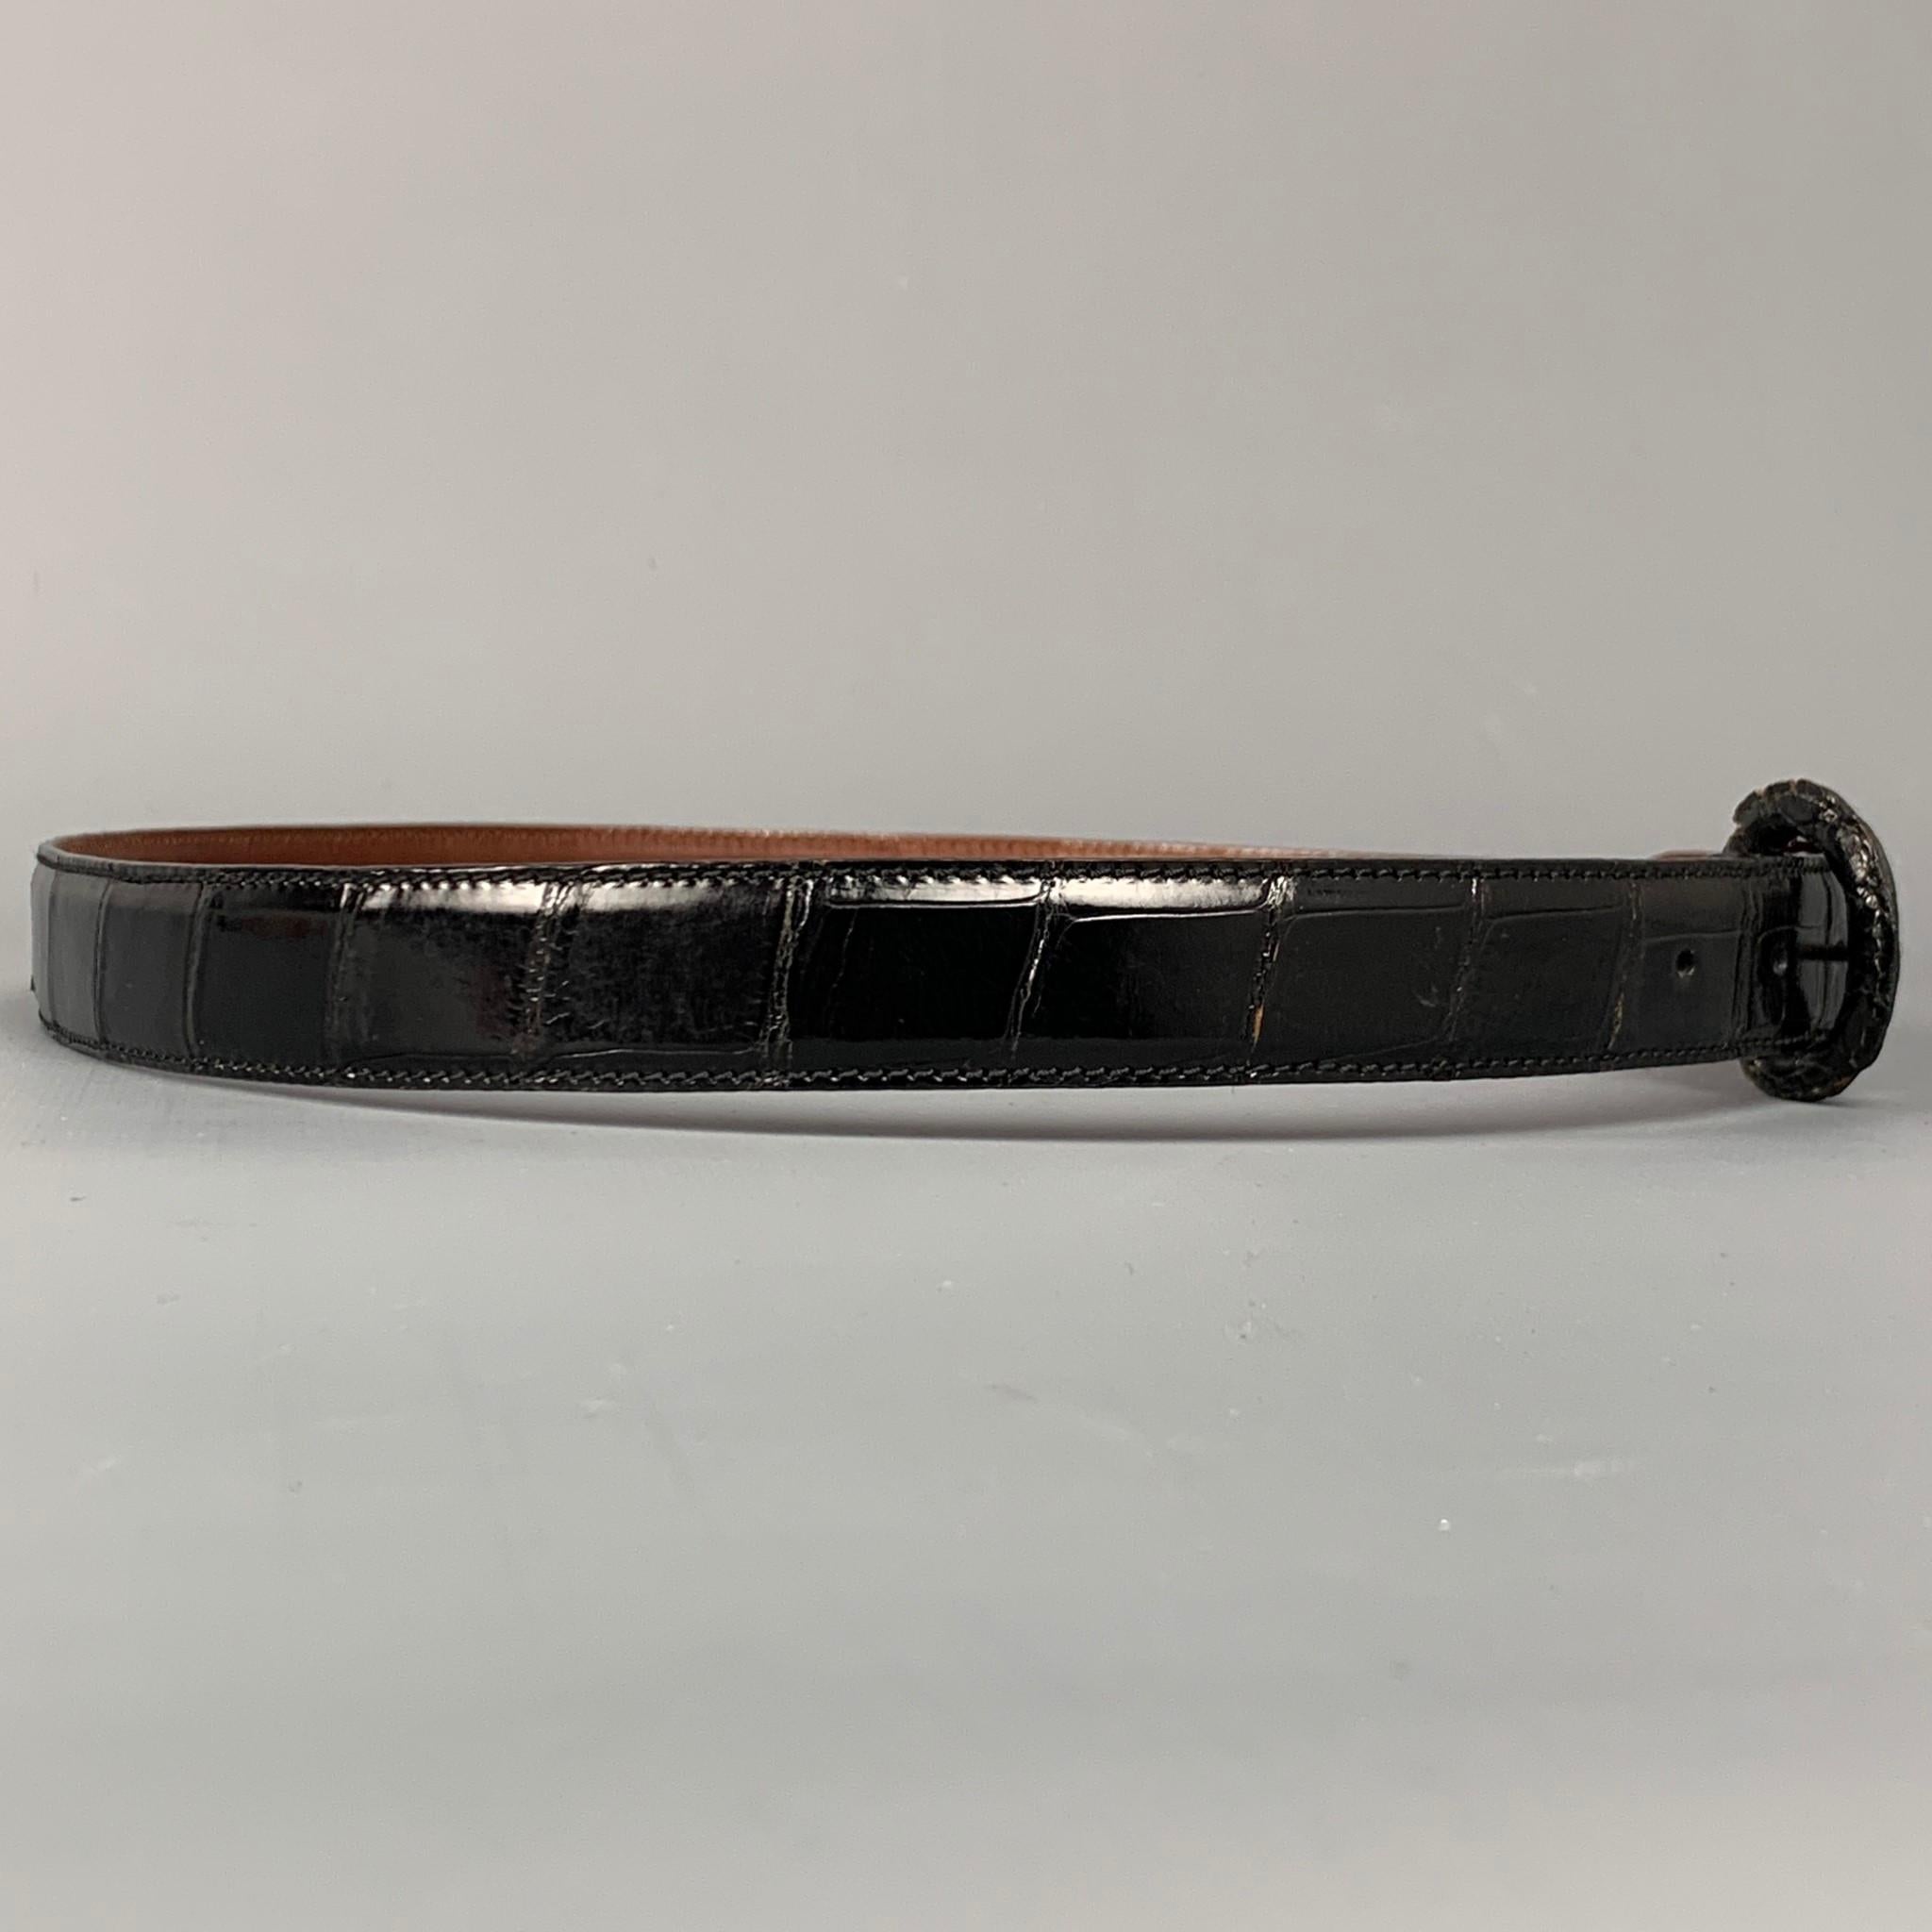 POLO by RALPH LAUREN belt comes in a black lizard leather featuring a covered buckle closure. Made in Italy.

Very Good Pre-Owned Condition.
Marked: 34

Length: 40 in.
Width: 0.75 in.
Fits: 32.5 in. x 35.5 in.